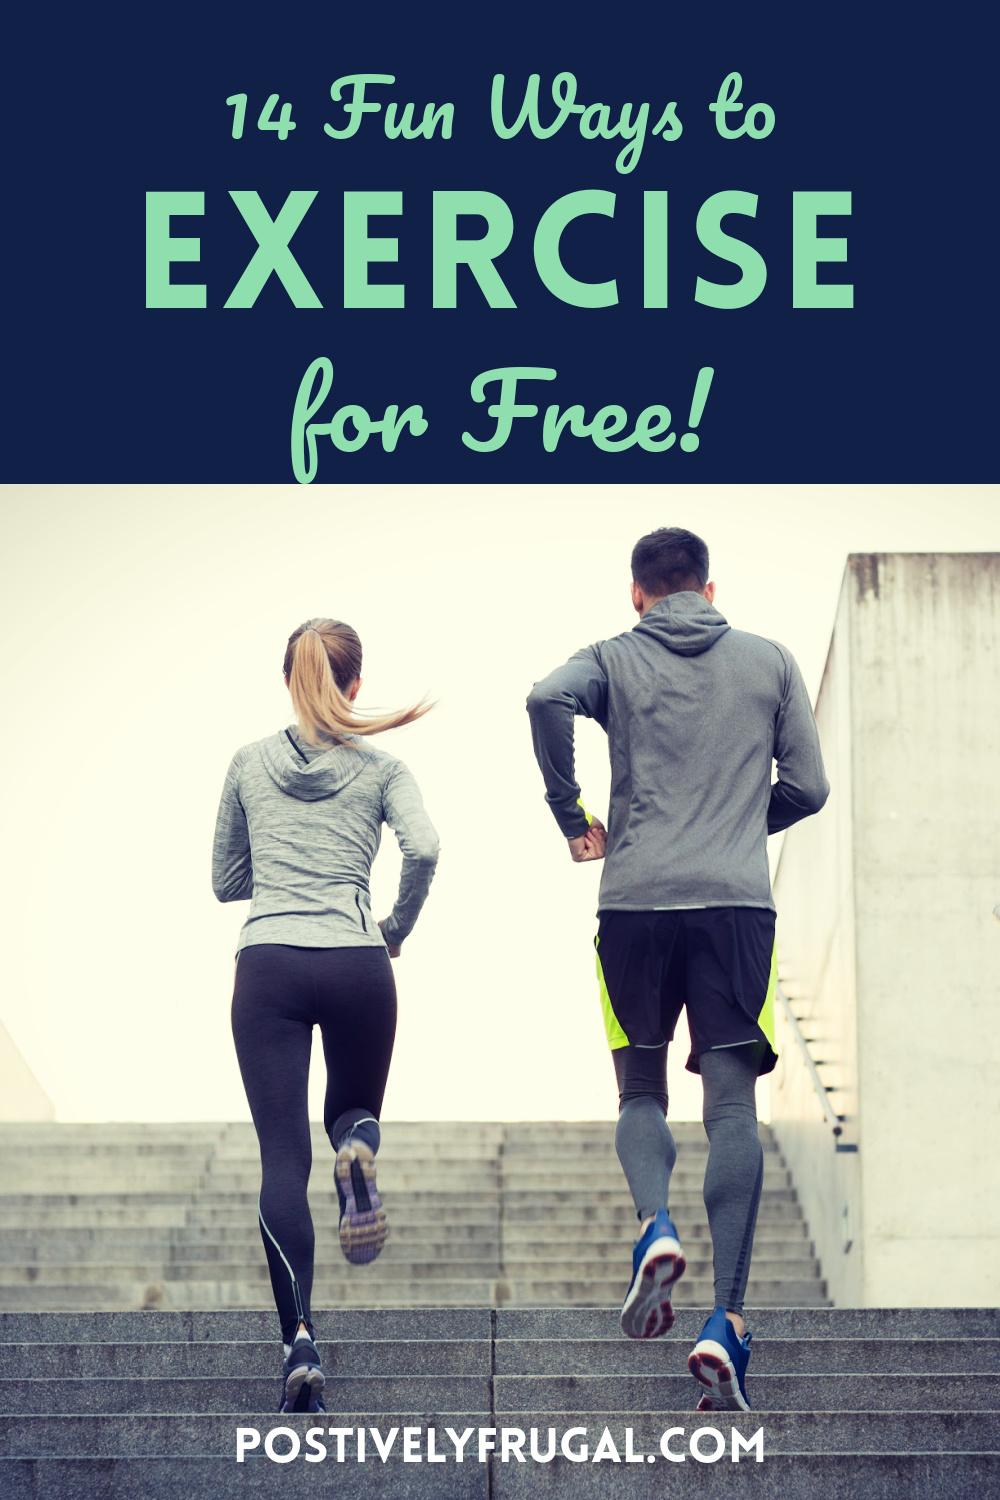 14 Fun Ways To Exercise for Free by PositivelyFrugal.com